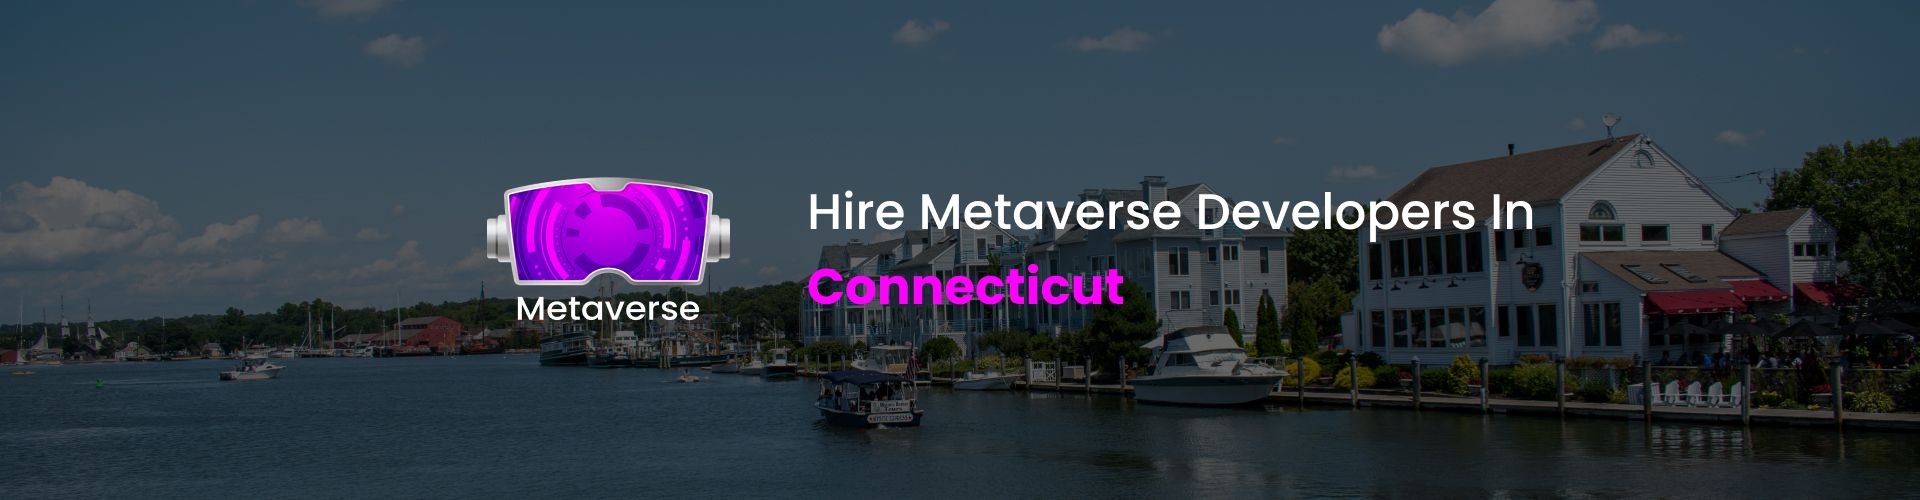 hire metaverse developers in connecticut